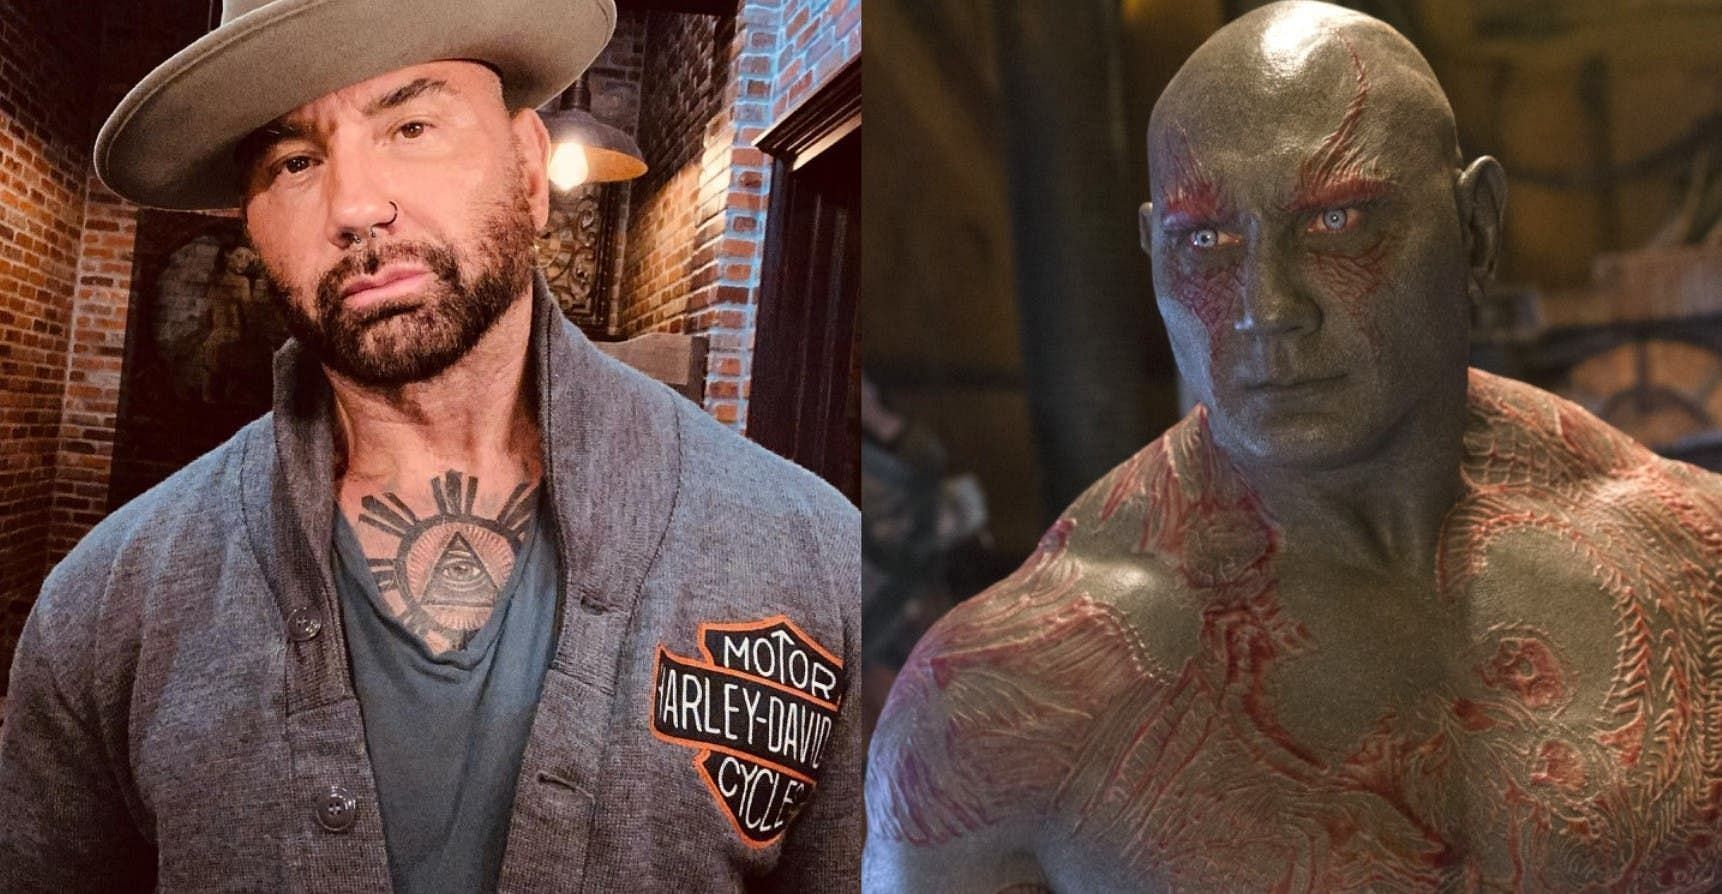 Dave Bautista won't star as Drax the Destroyer character after